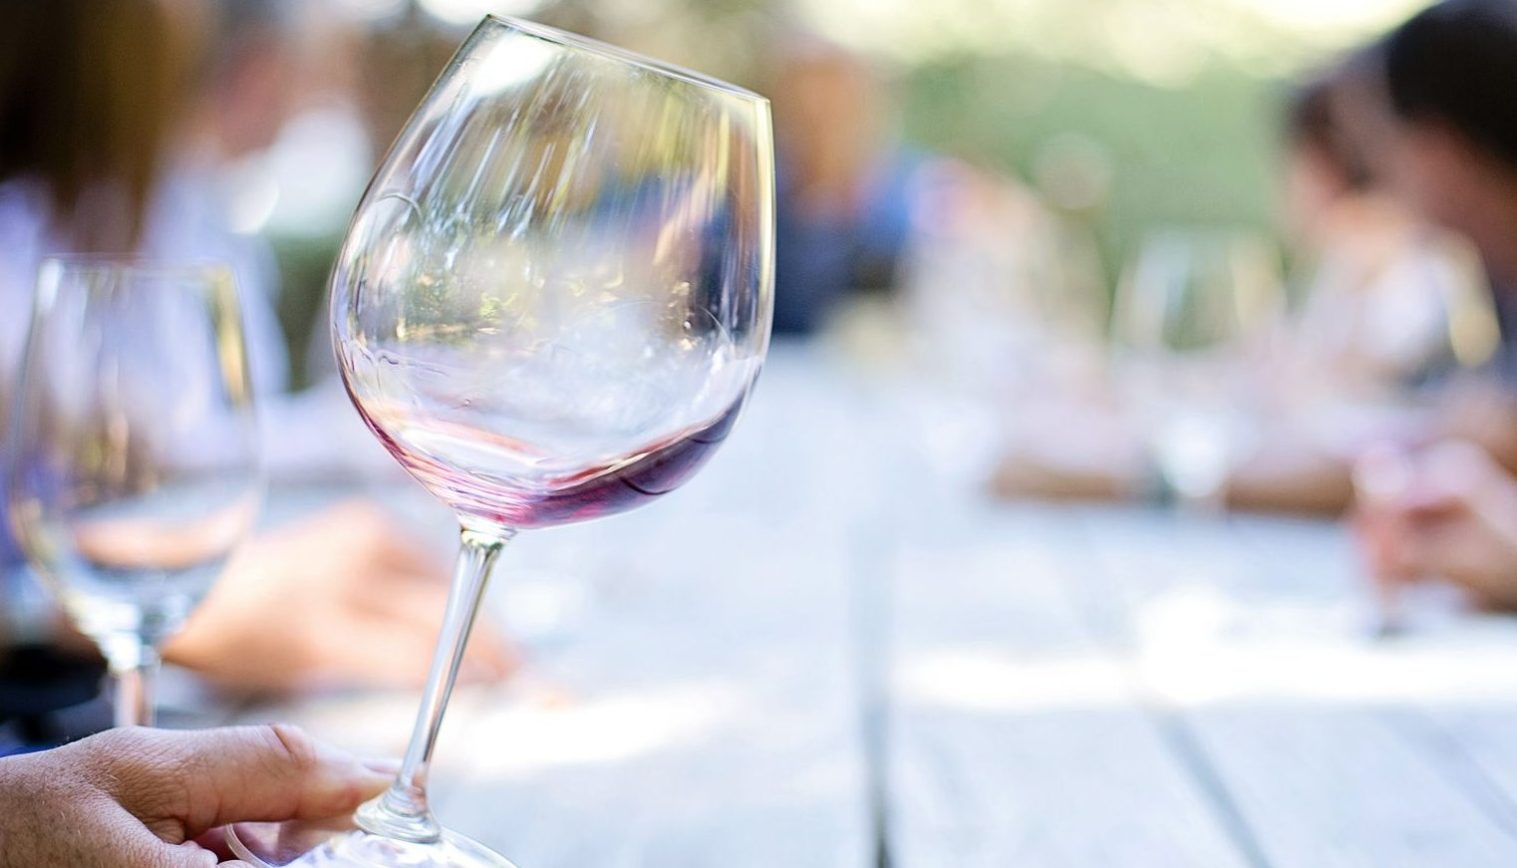 Bottoms Up! – Host your own wine tasting and boost your school fundraising